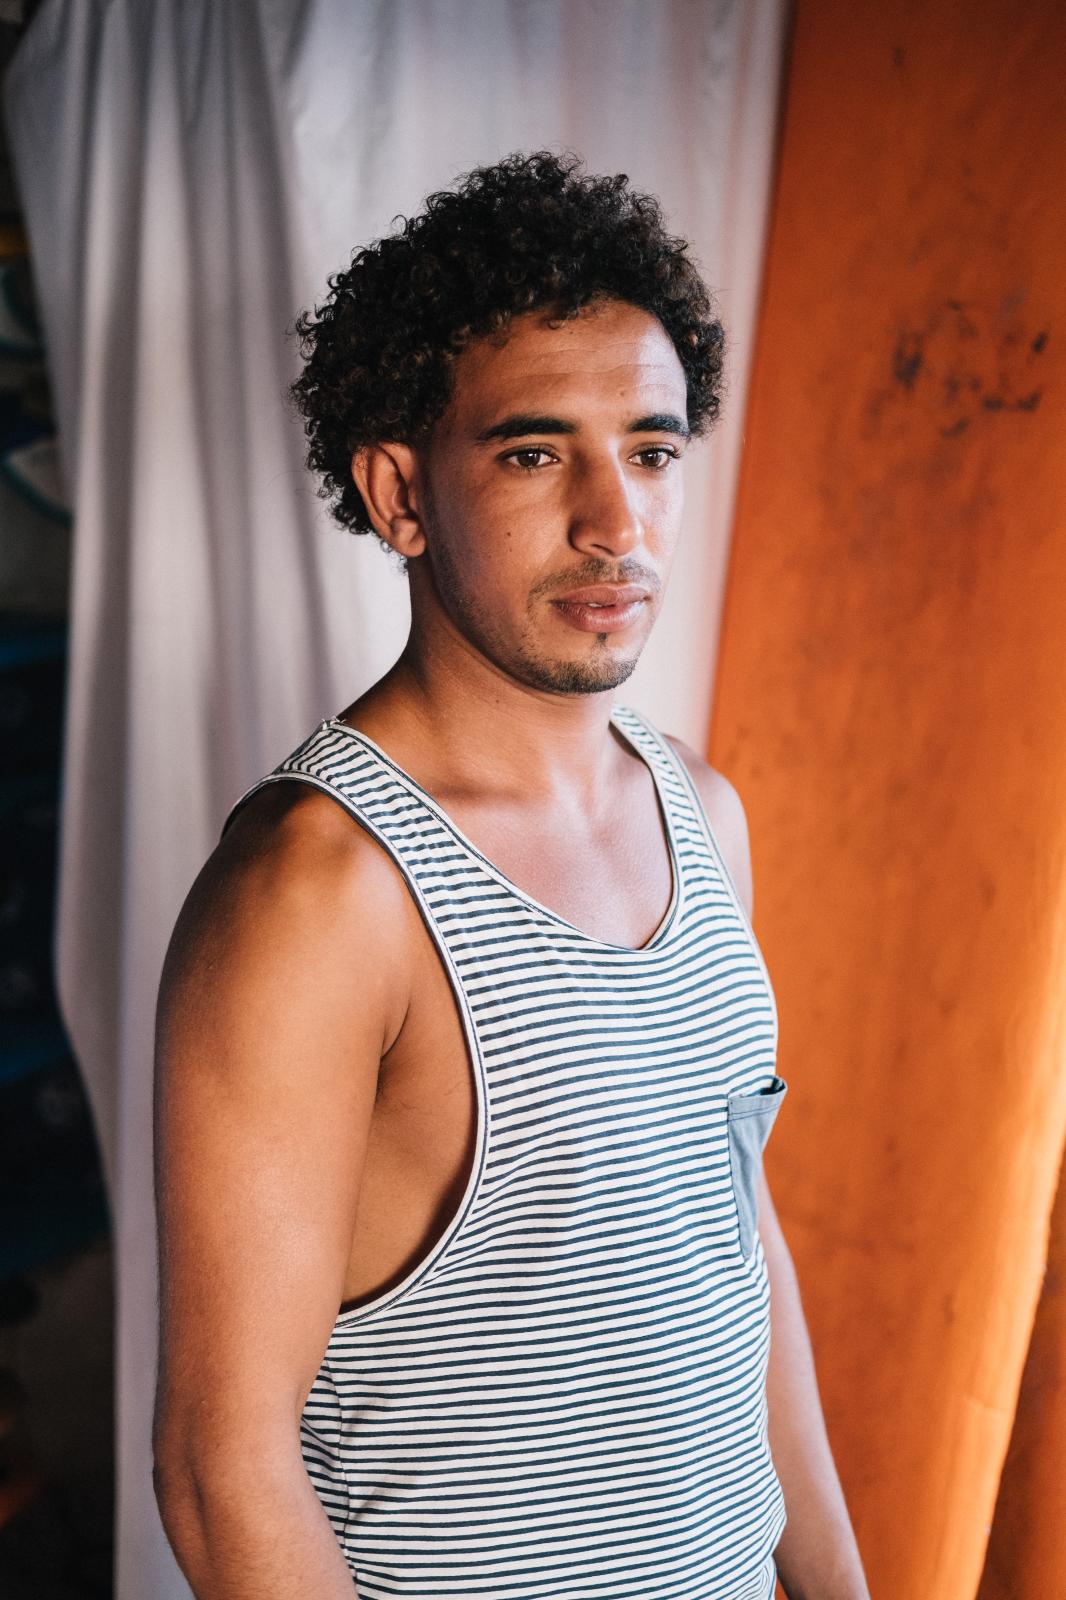 Rural youth  - Ali is 21 years old and he is from Sidi Kaouki village....